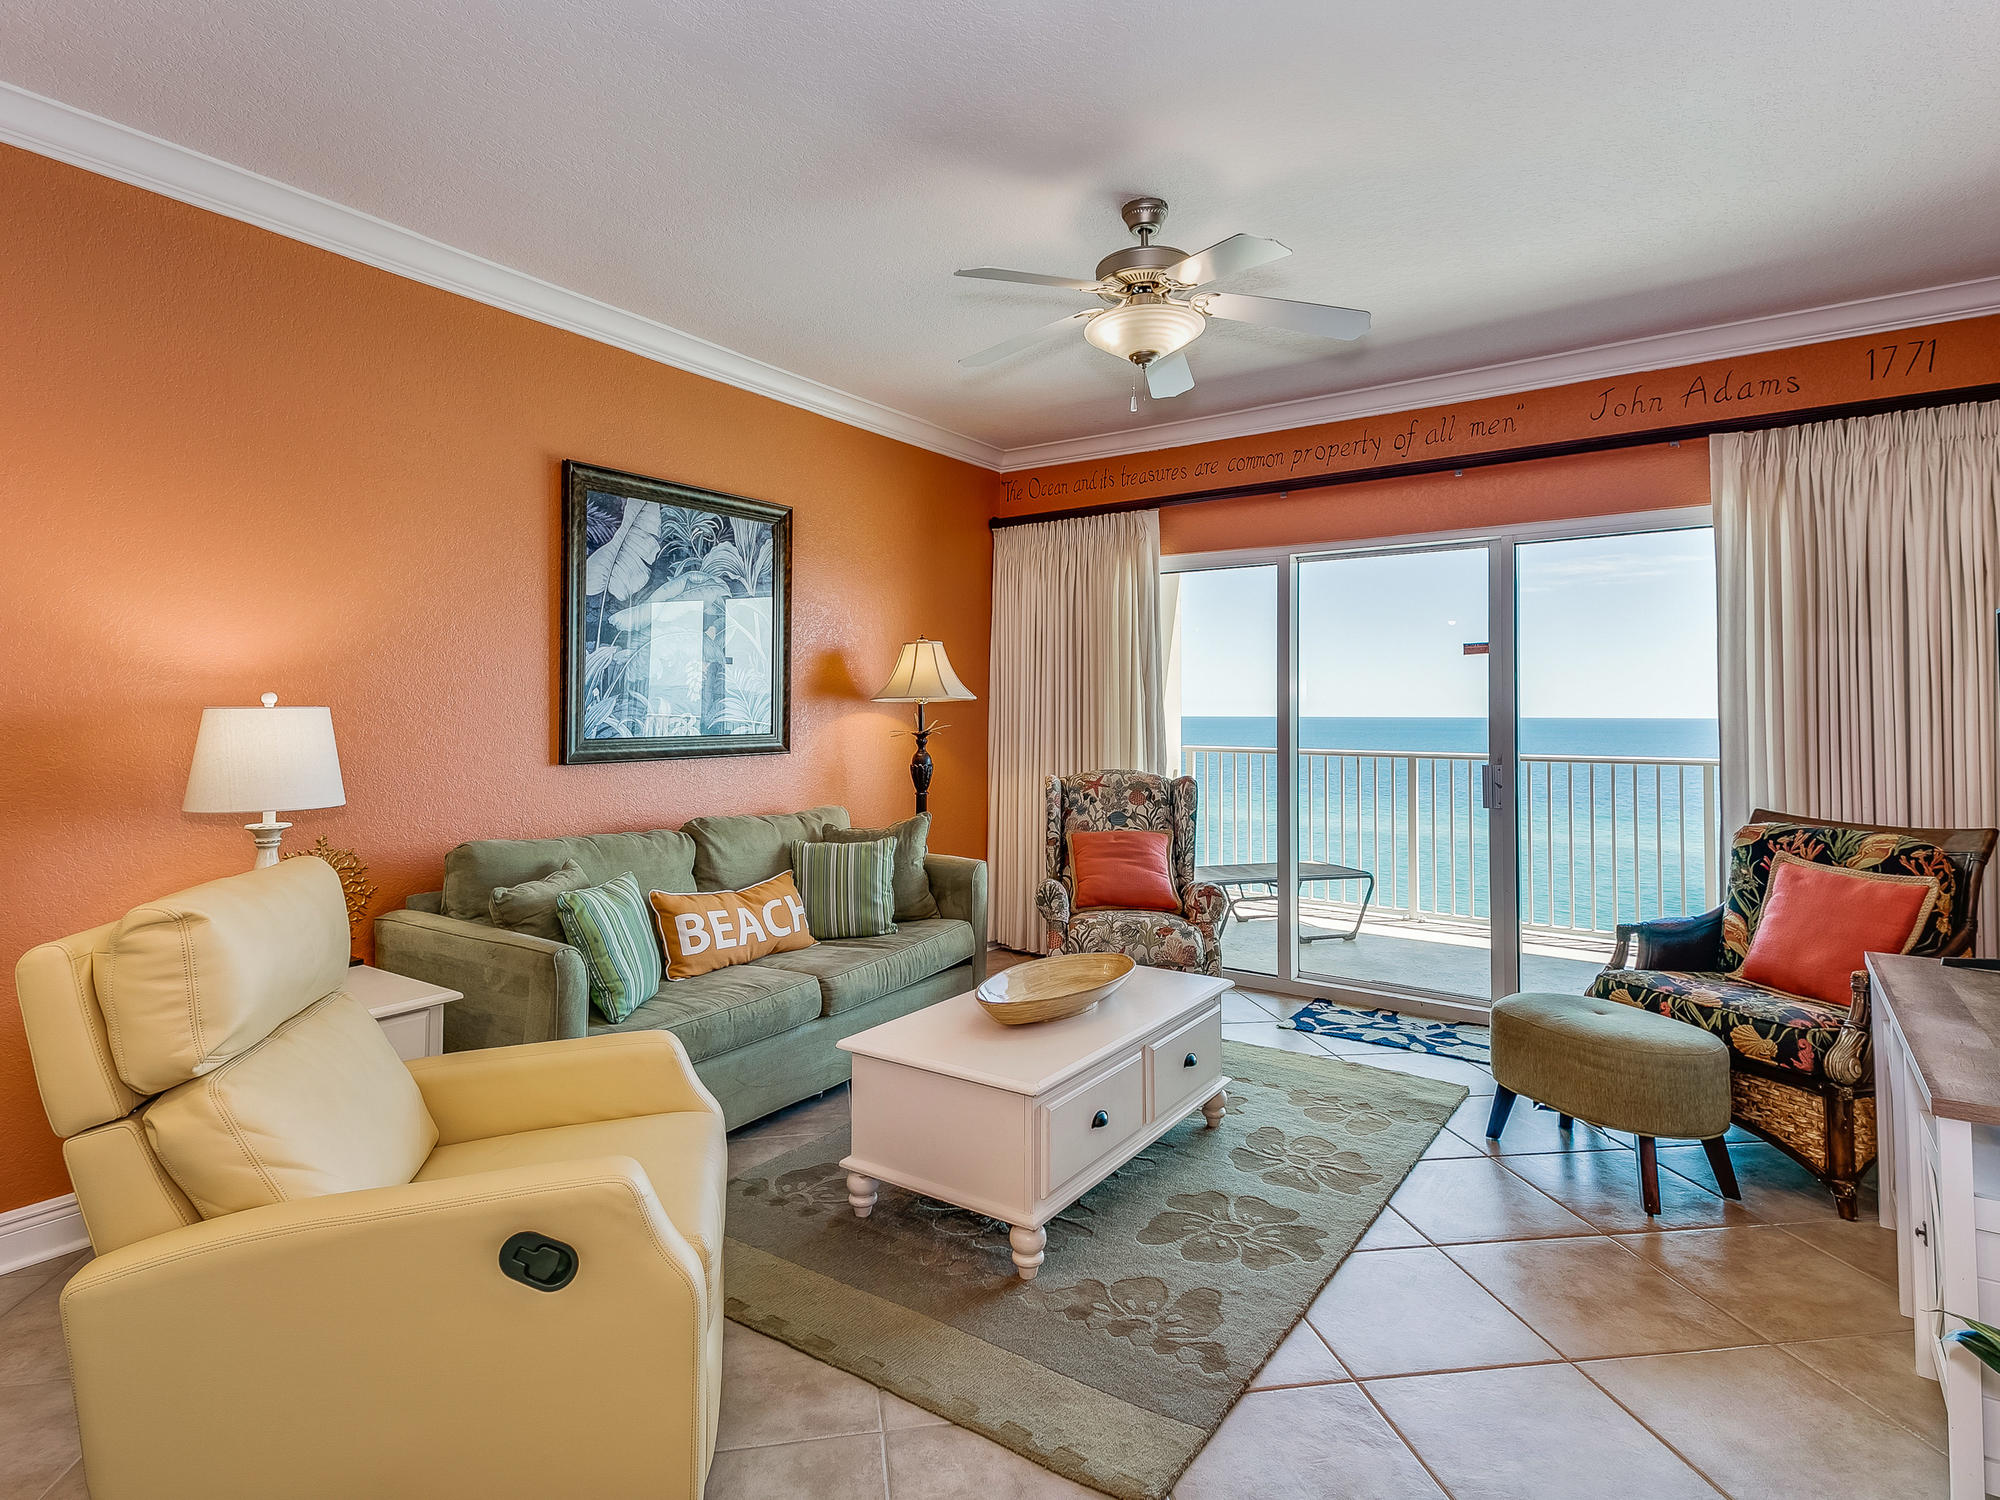 Work From Home at the Beach in Gulf Shores, Gulf Shores Vacation Condo